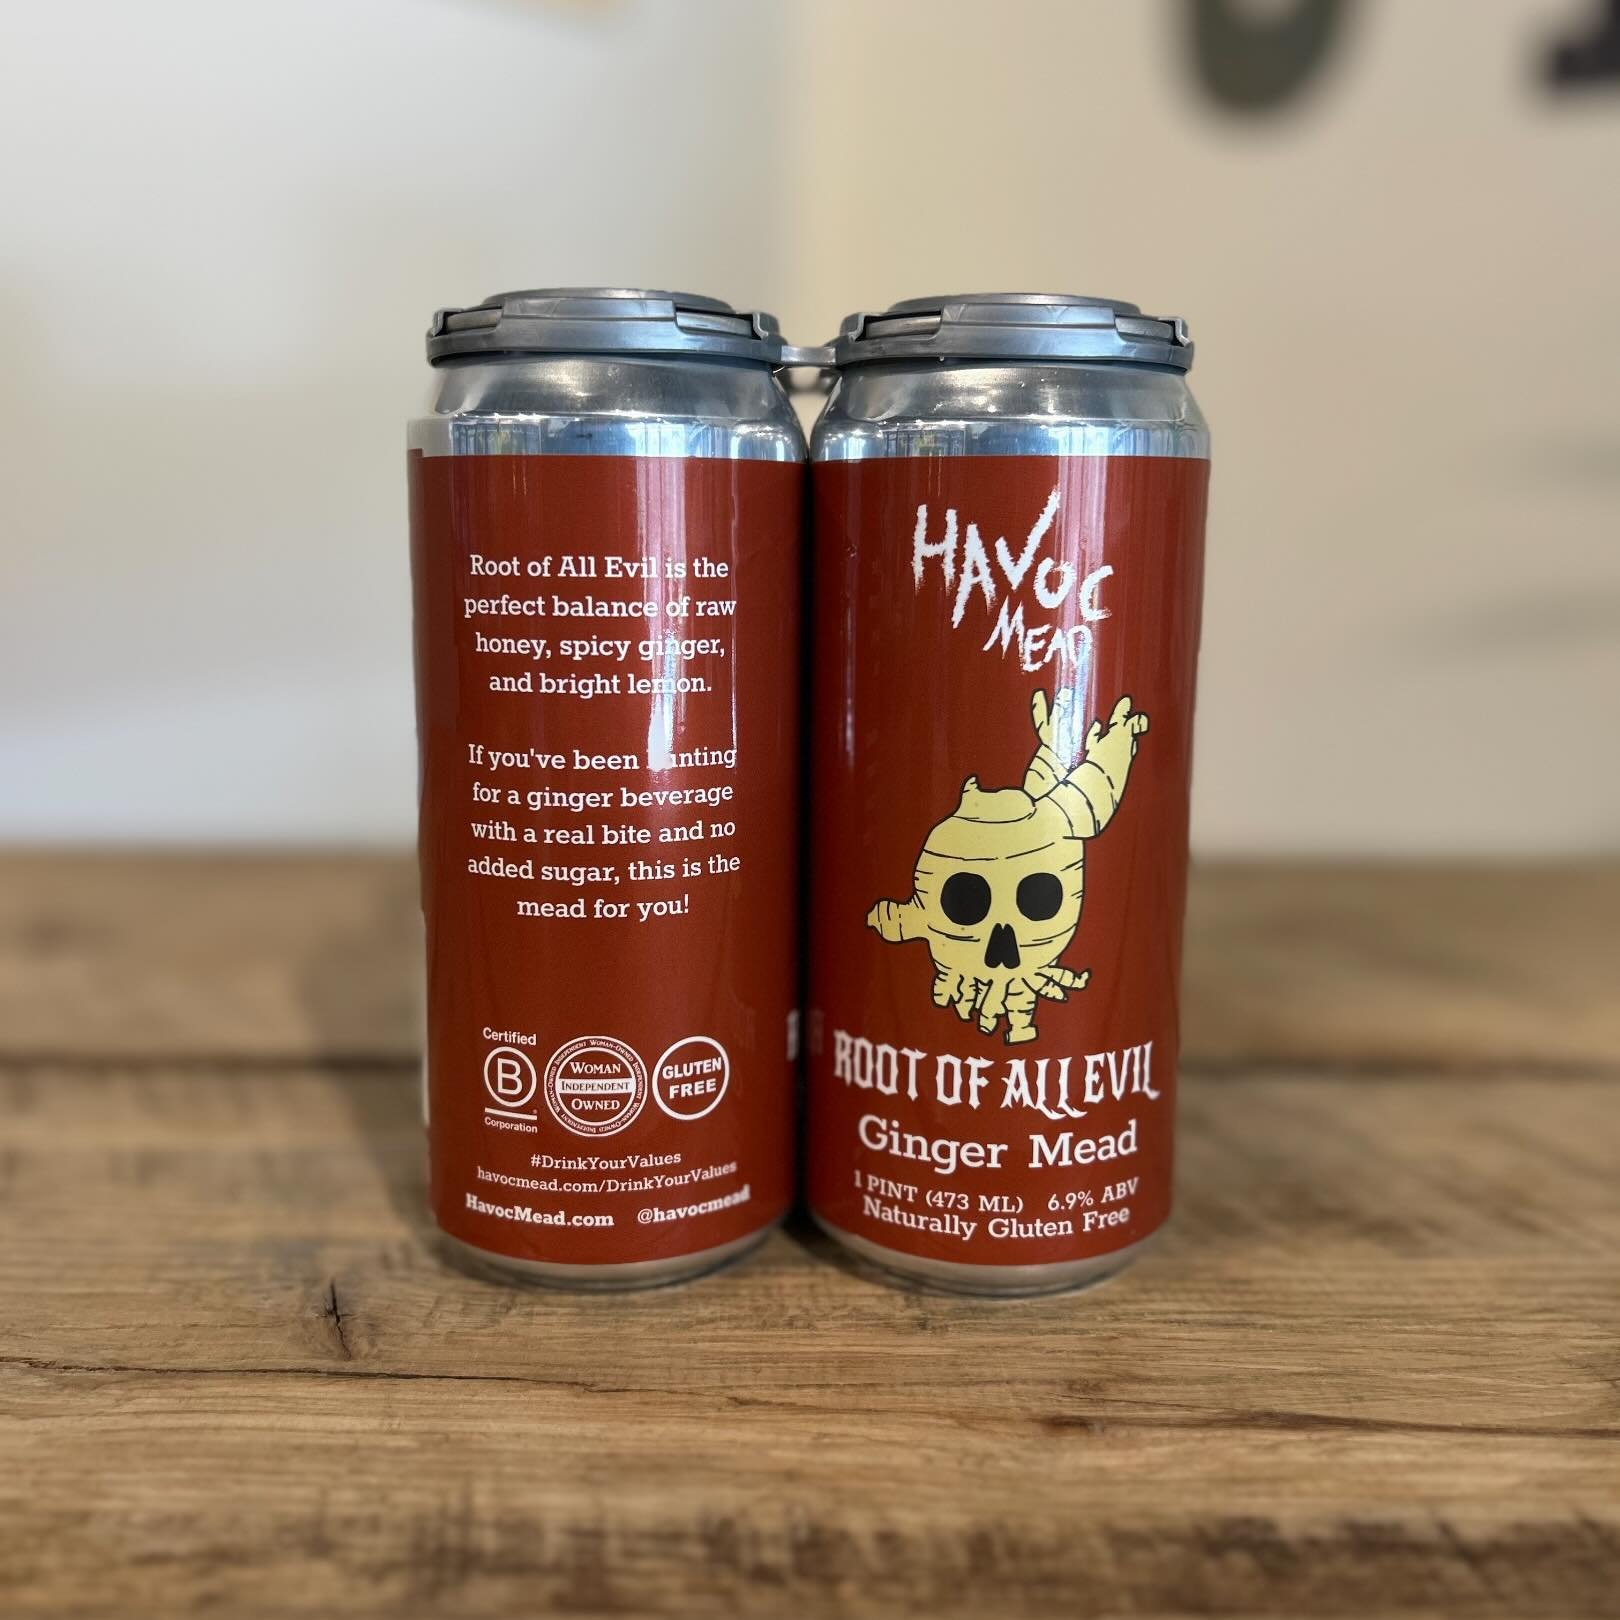 Welcoming @havocmead back to the shop this week #NowAvailable #SudburyCraftBeer #TheSuds
&mdash;
Root of All Evil is back with its combination of bright lemon and spicy ginger. Fans of Root are going to love the balance on this one.

Our signature gi